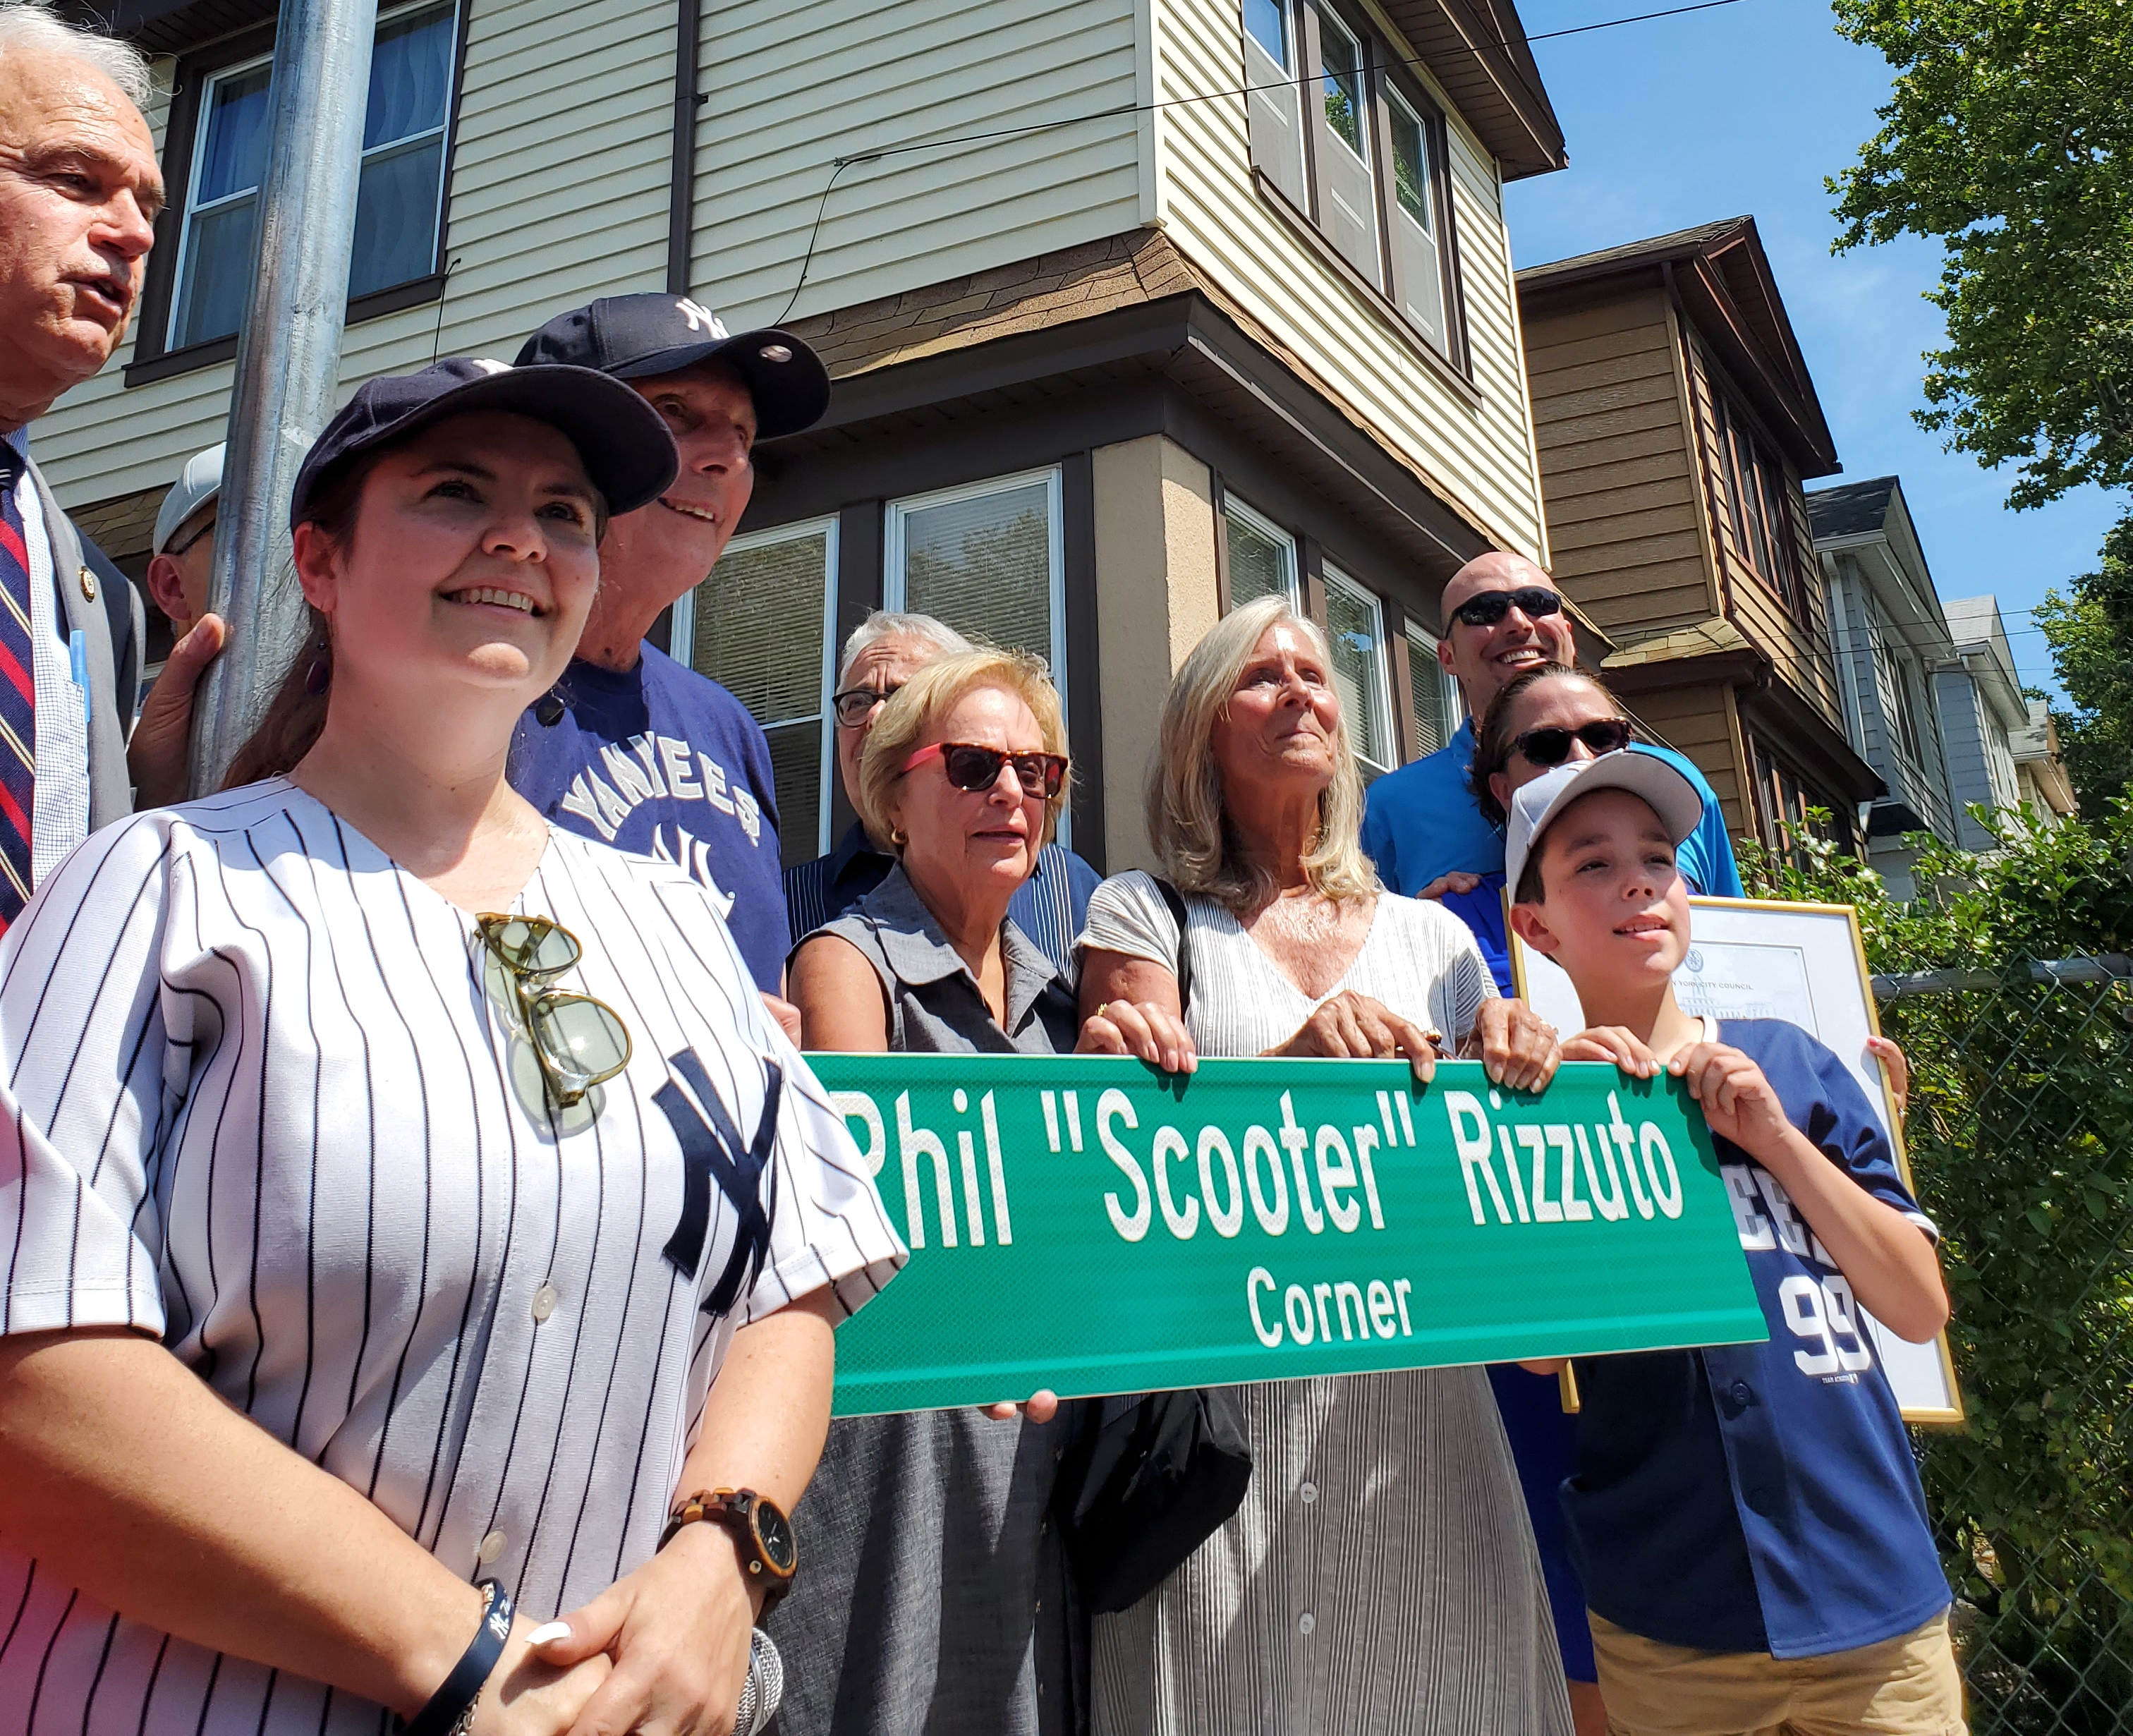 Holy cow!': Phil Rizzuto has a corner named after him in Queens